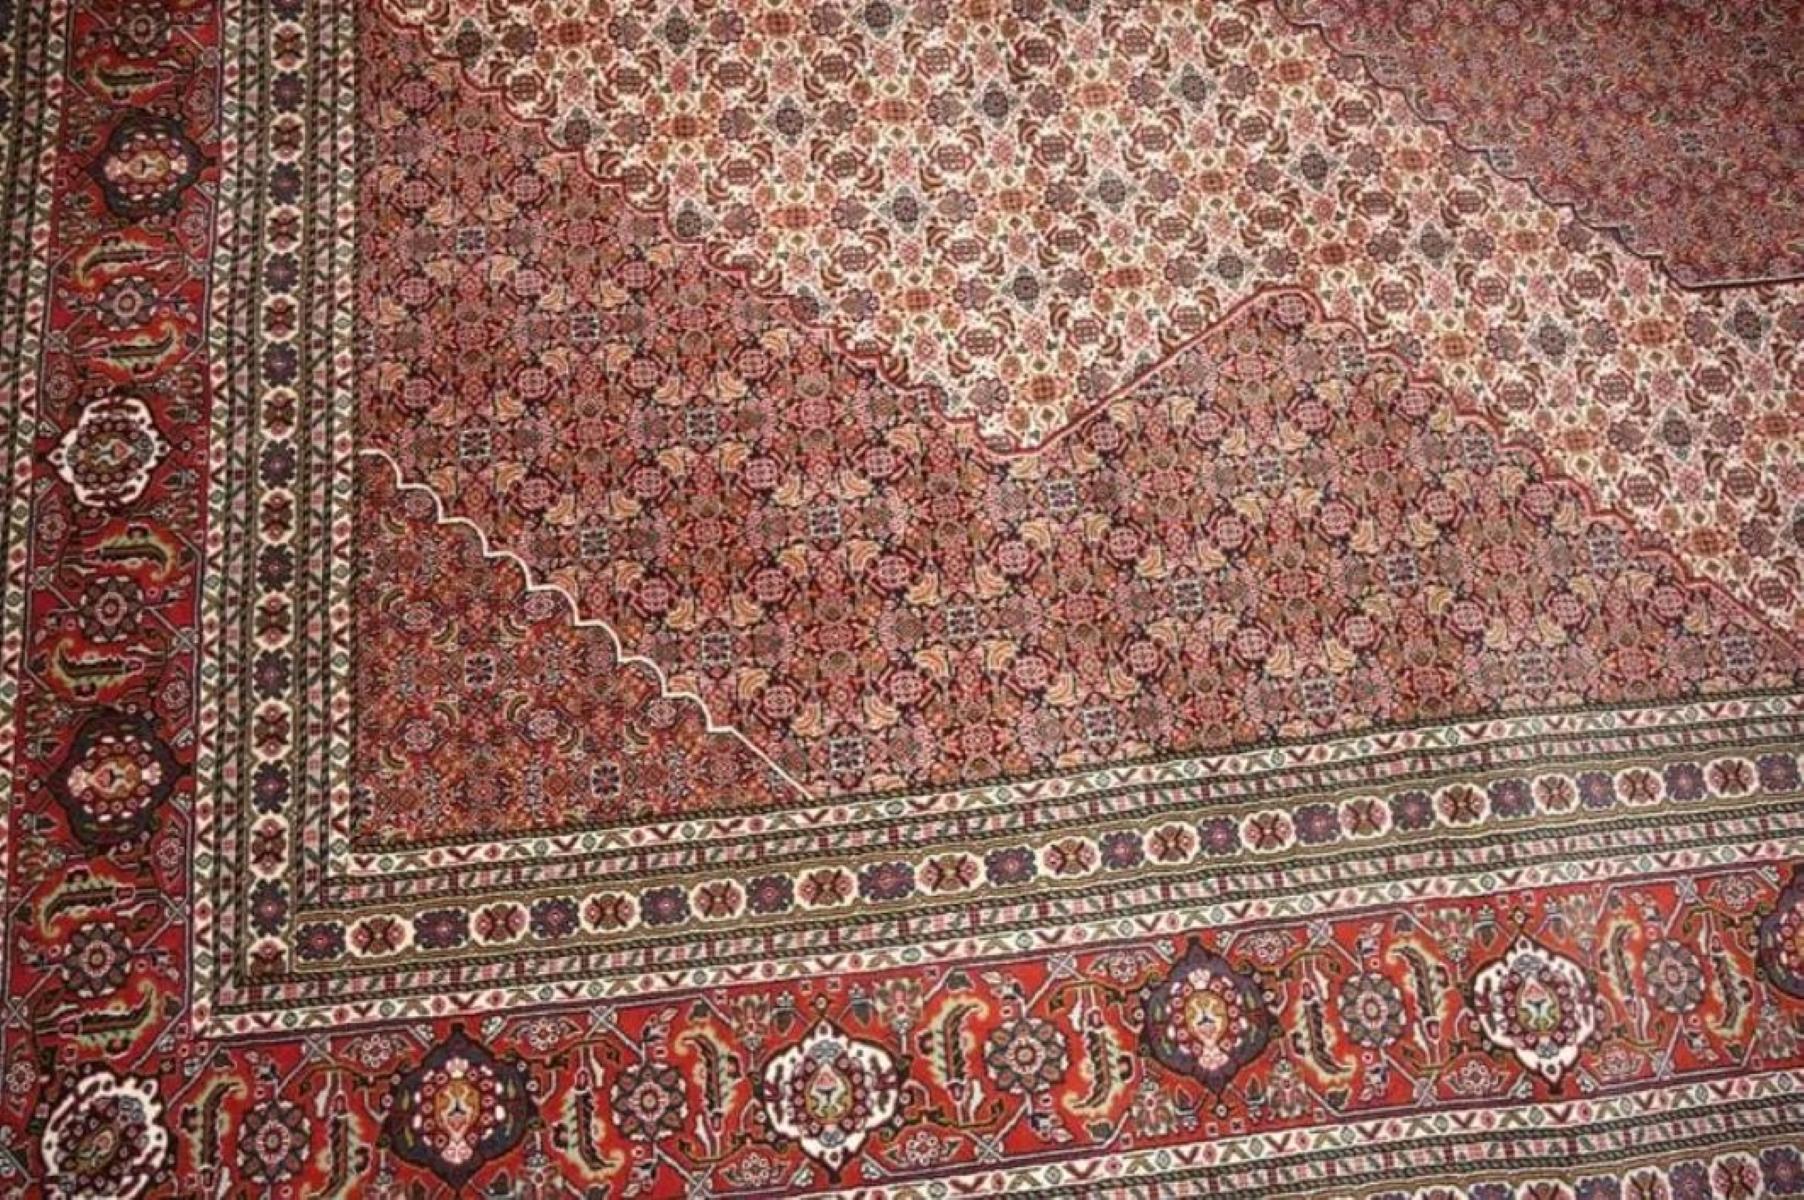 Very fine Persian Rug Tabriz 400 Knots per inch, Size 8.3 x 11.5 Iran Tabriz  Wool and Silk. Around 5,500,000 knots tied by hand one by one. It takes 3.5 years to complete this piece of art.